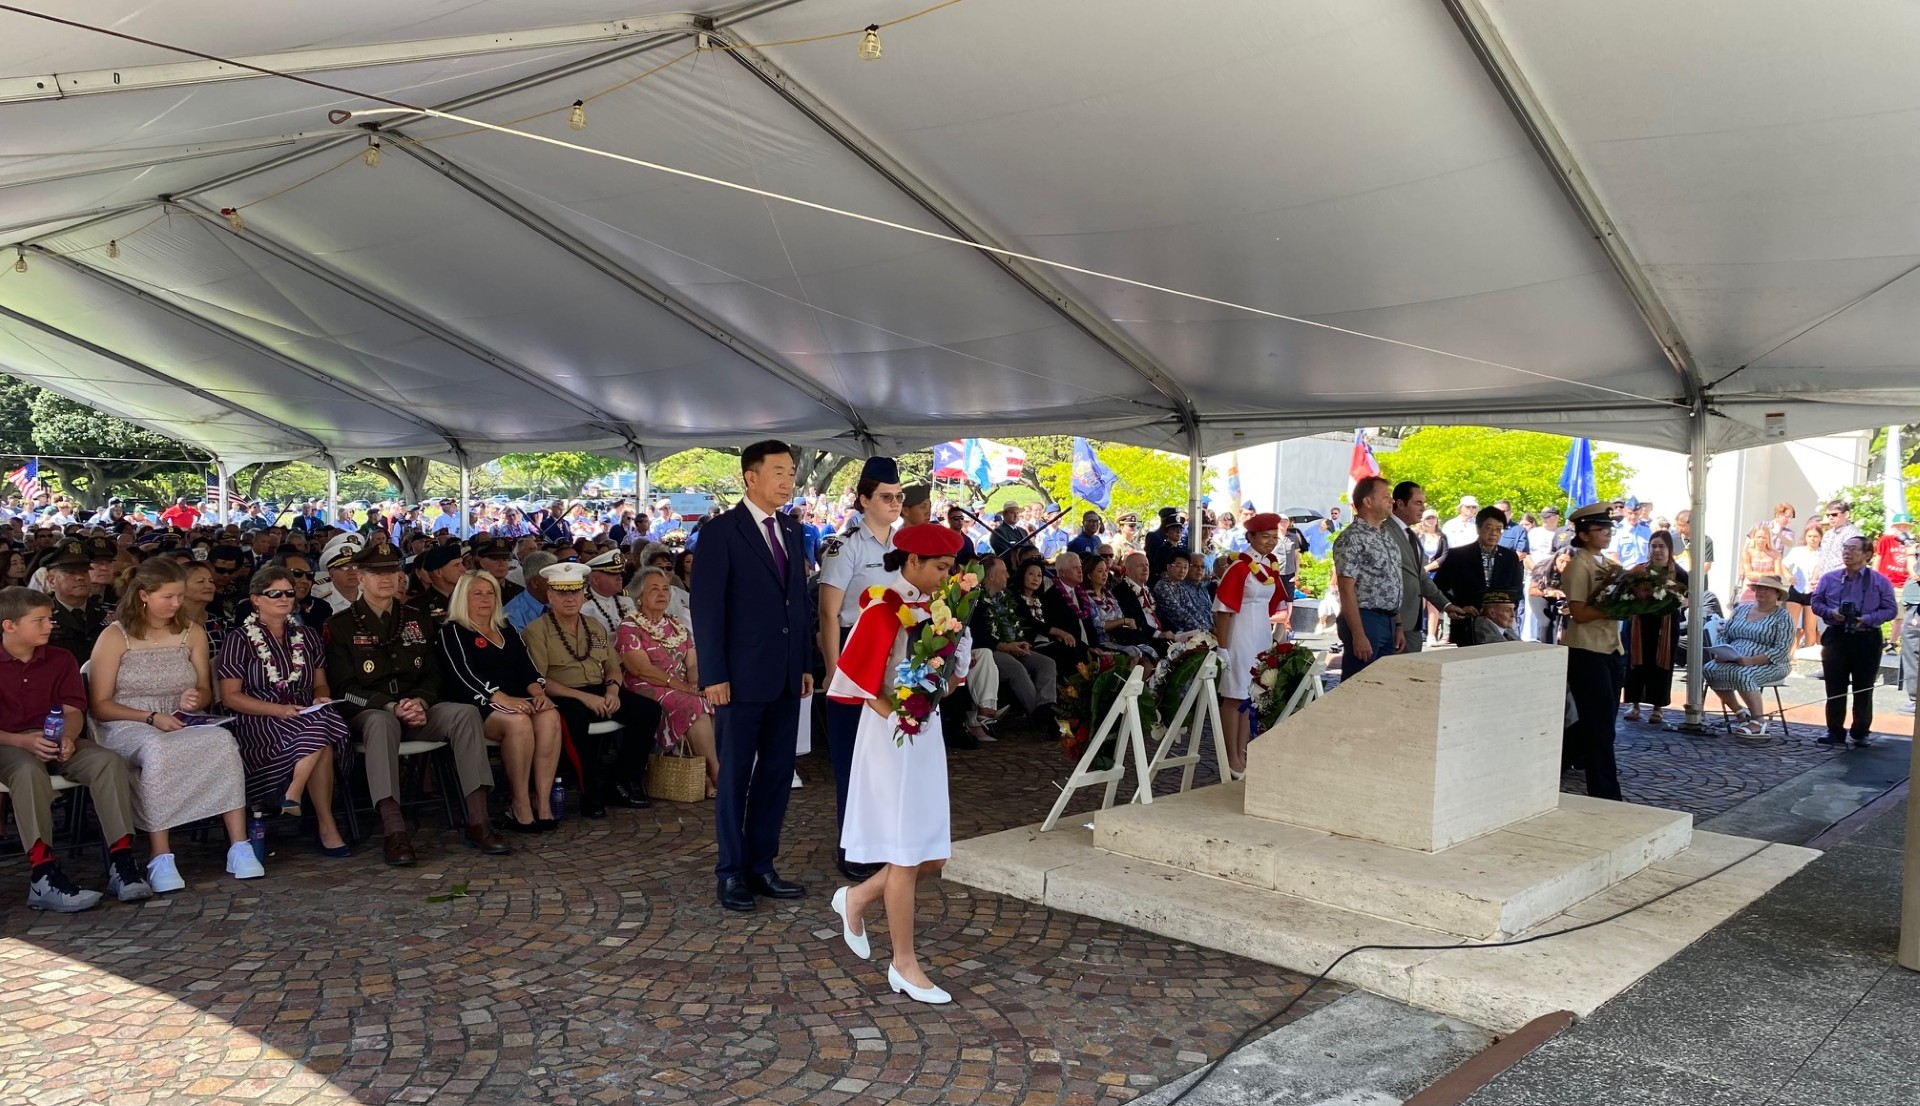 Memorial Day Ceremonies (hosted by Honolulu Mayor and Hawaii Governor)